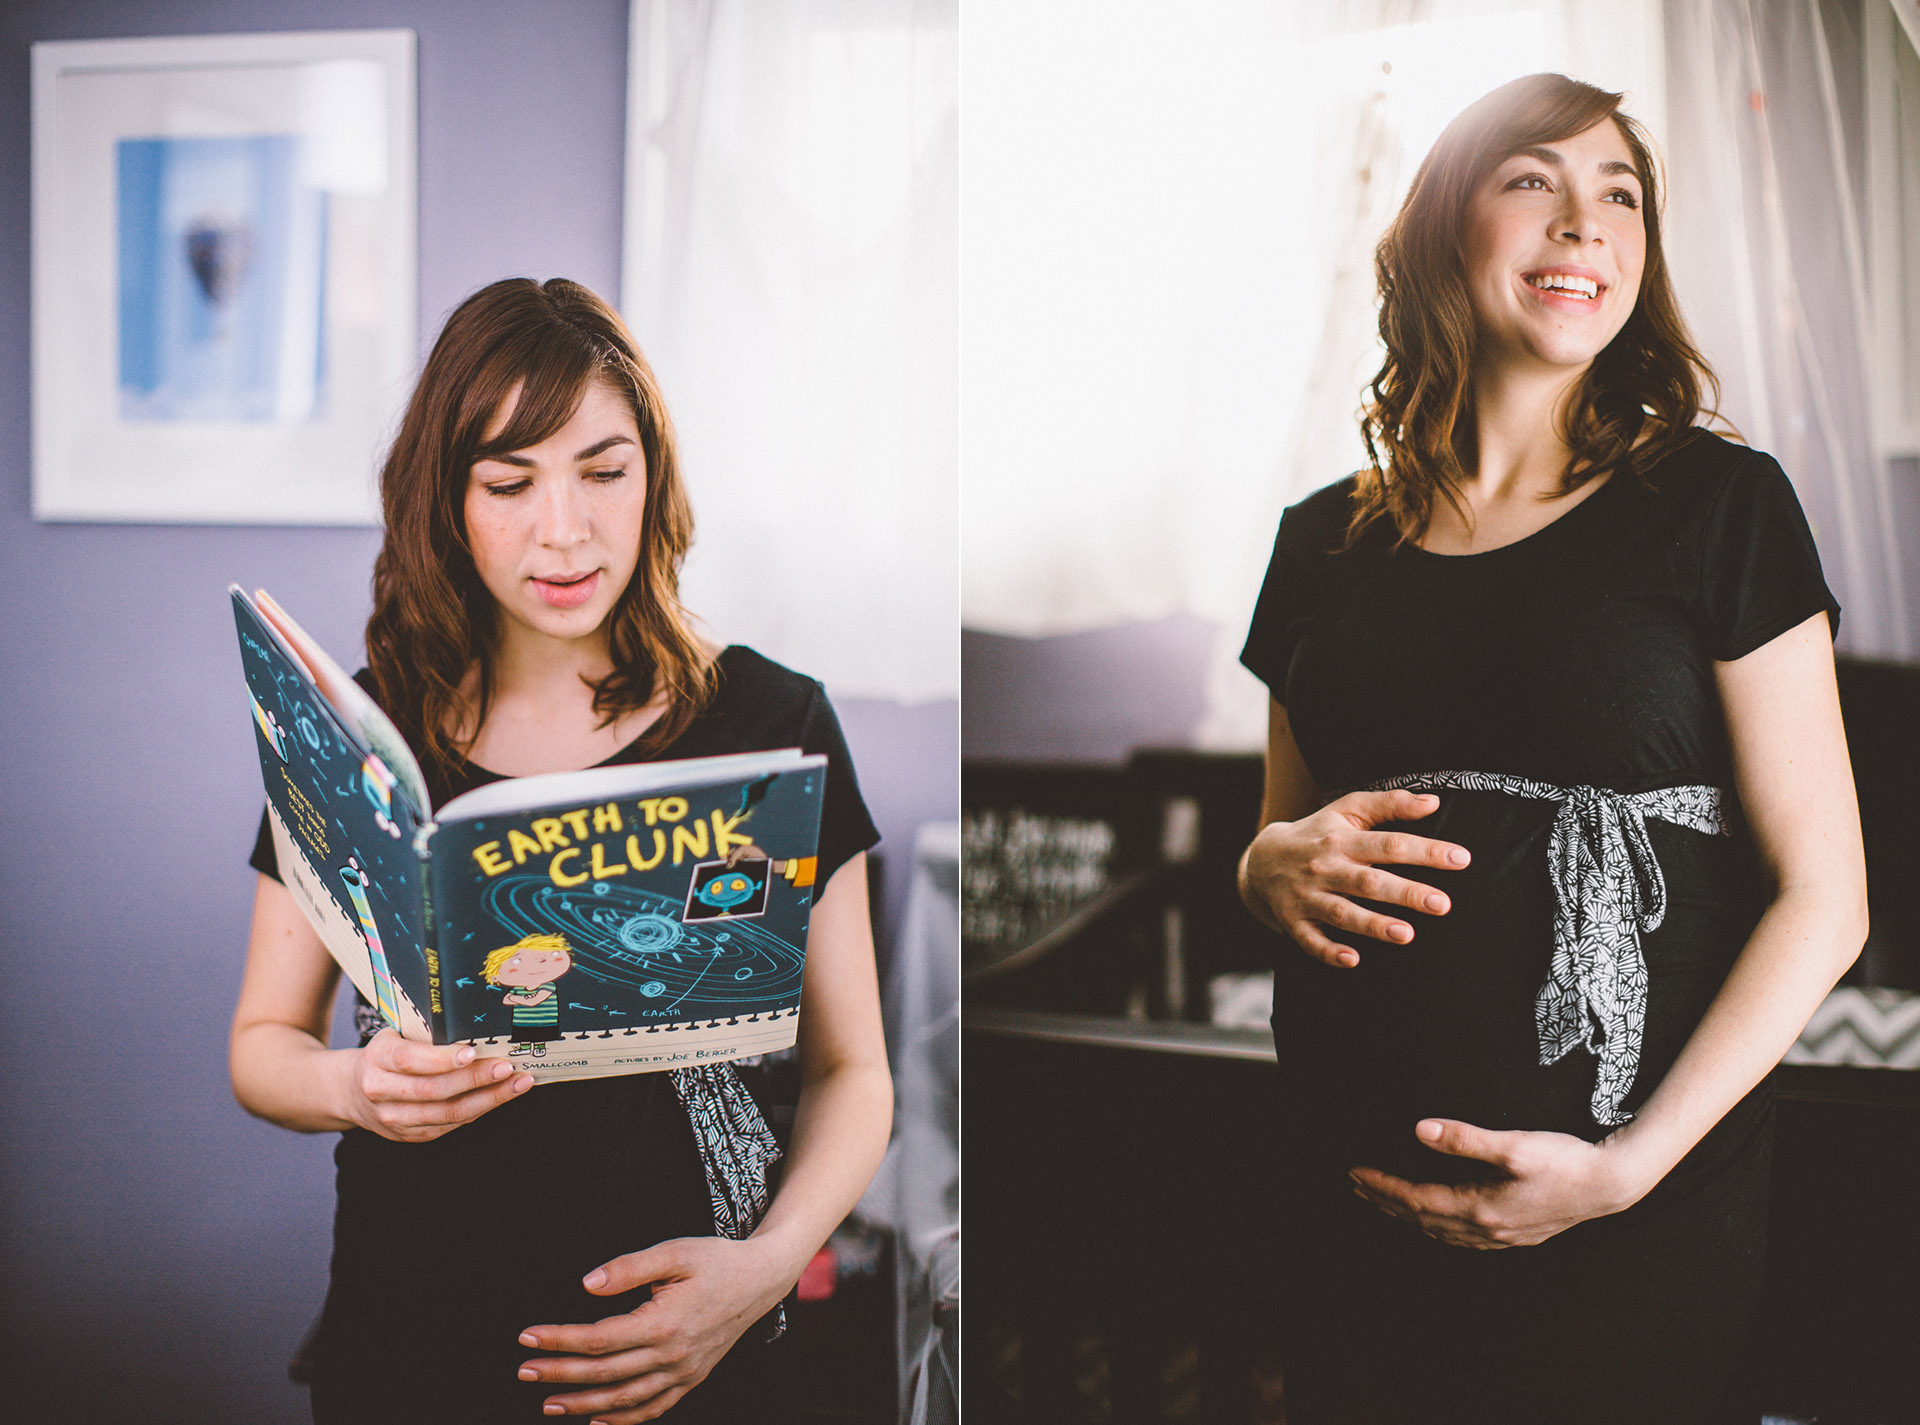 Angela Clunk Maternity Photos During Pregnancy - too much awesomeness photography - image 48.jpg